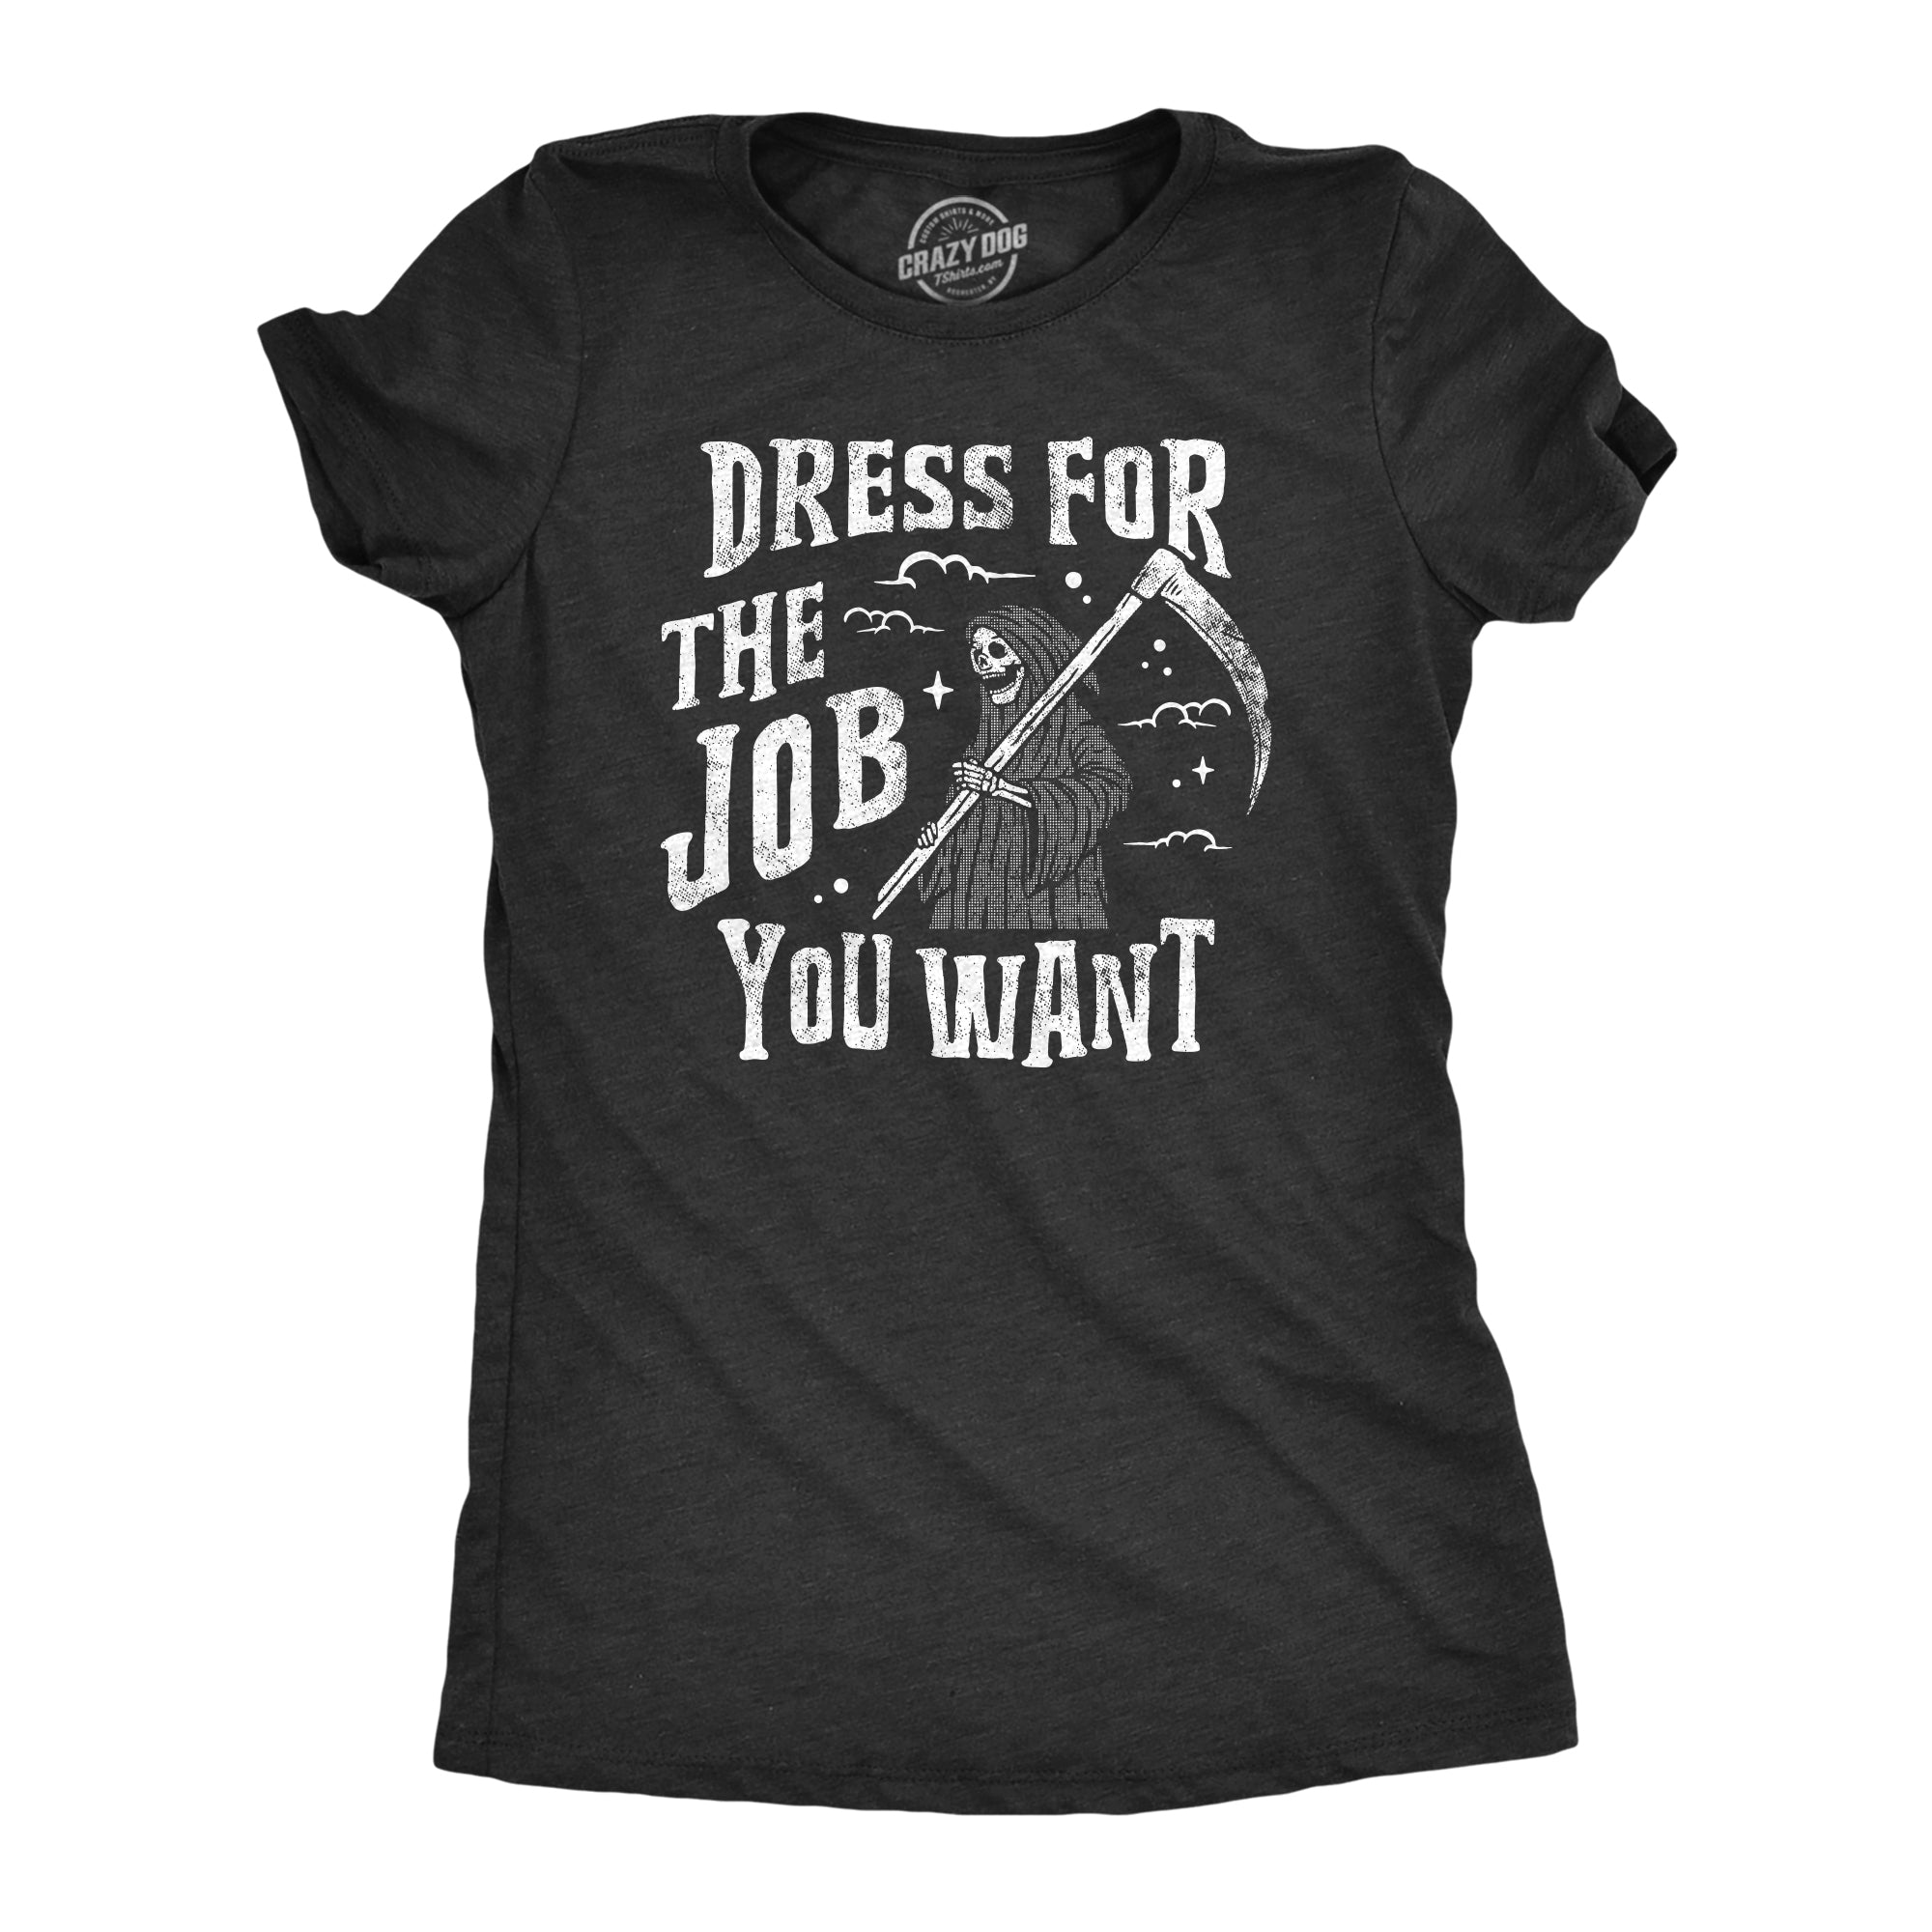 Funny Heather Black - JOB Dress For The Job You Want Womens T Shirt Nerdy Office Sarcastic Tee